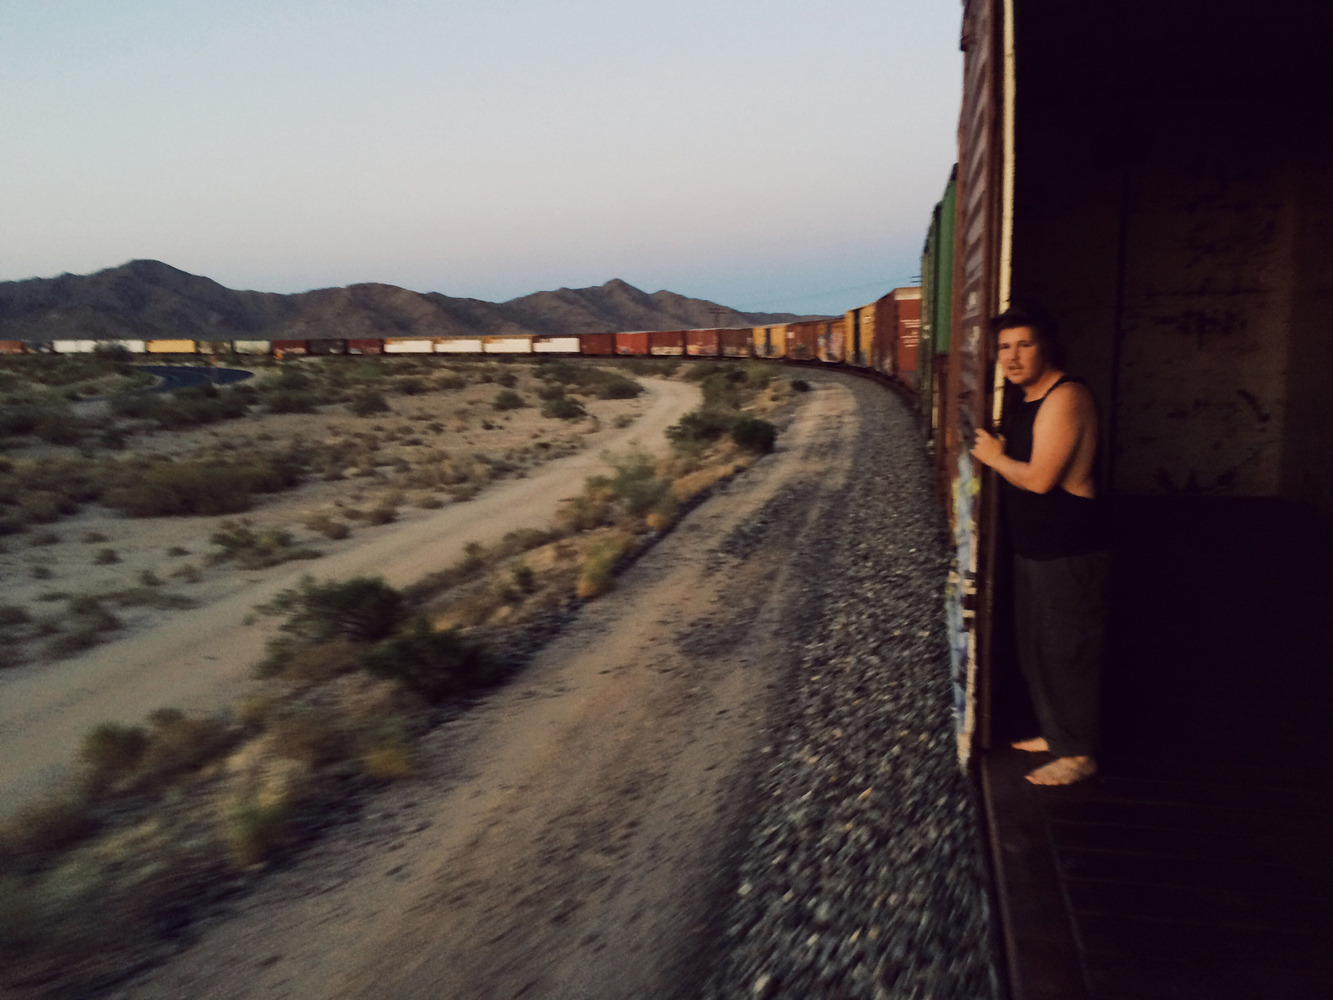 Photographer train hops across the American Southwest with an iPhone and a sleeping bag 1